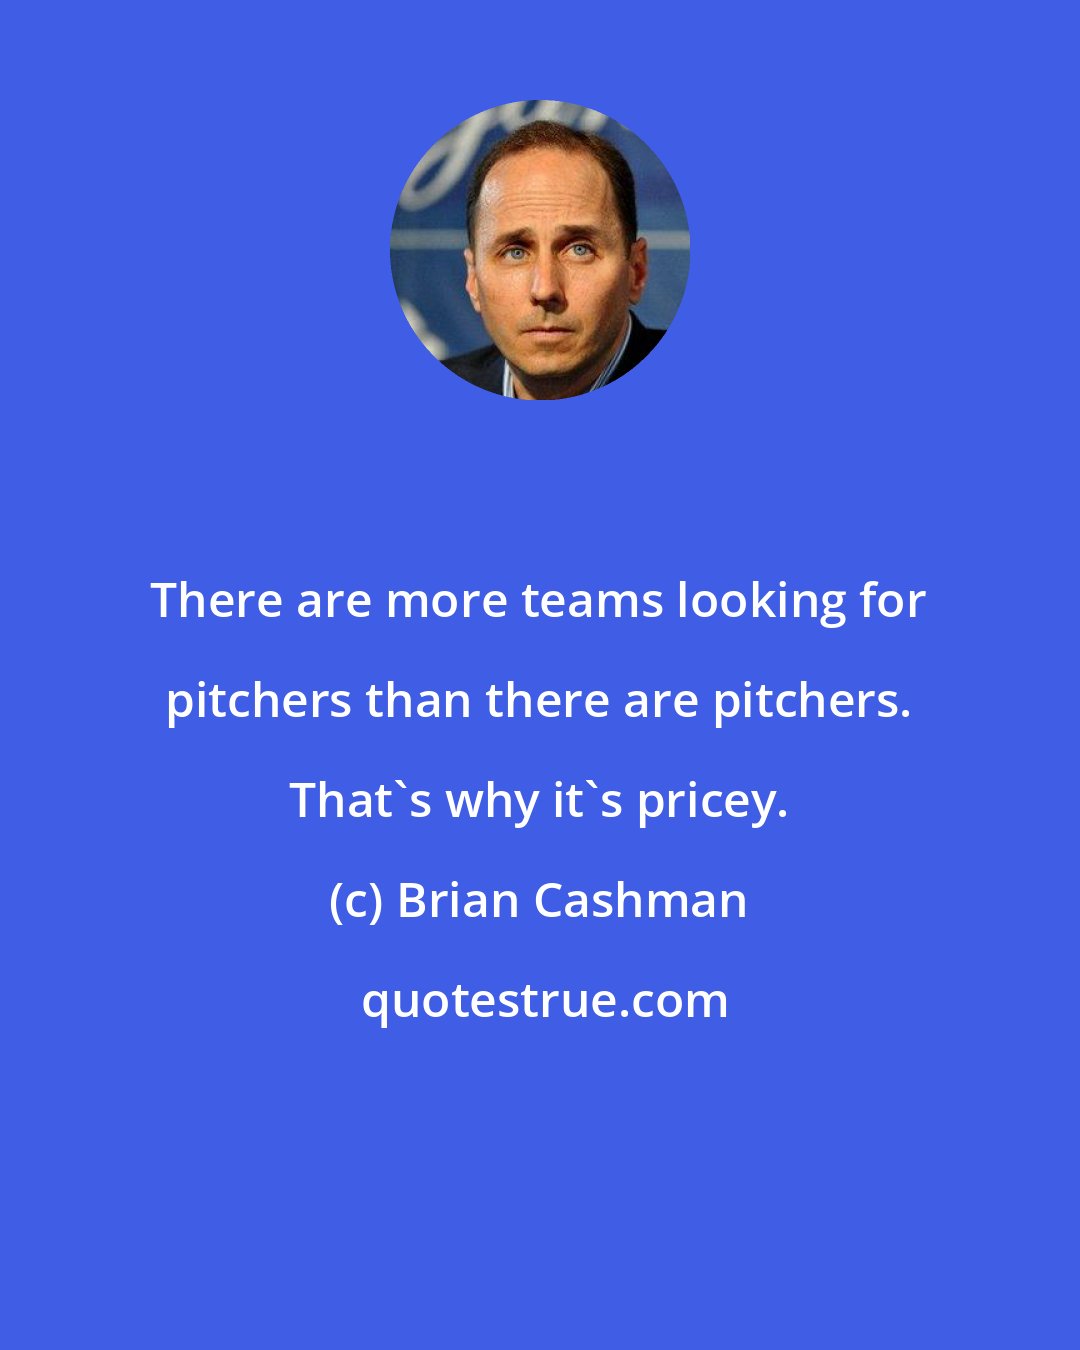 Brian Cashman: There are more teams looking for pitchers than there are pitchers. That's why it's pricey.